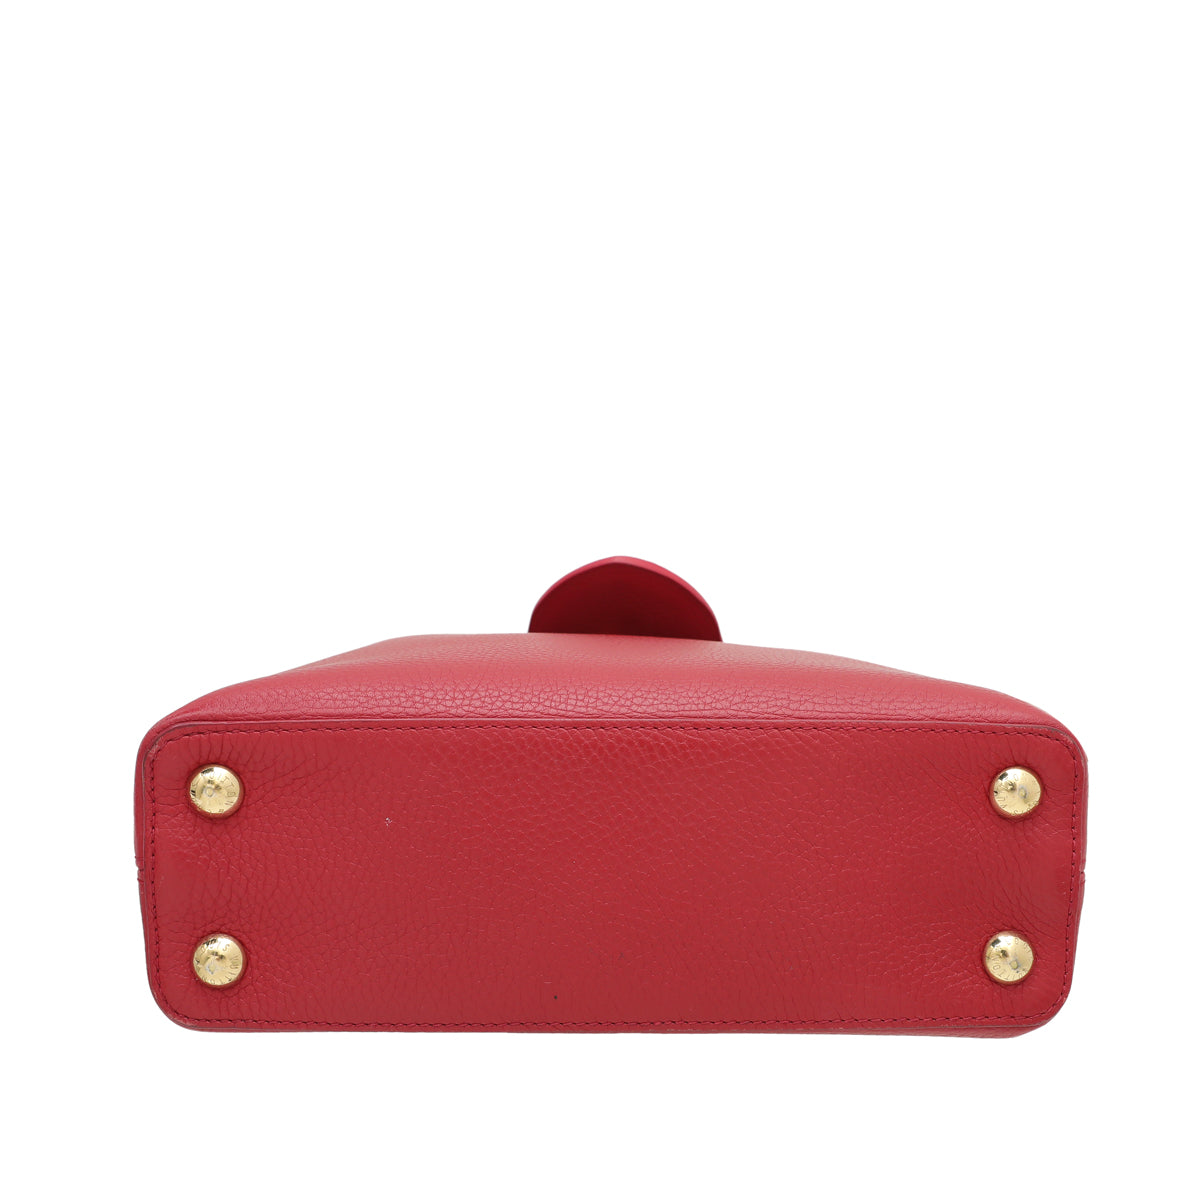 Louis Vuitton Red Capucines Bb by Ann's Fabulous Finds